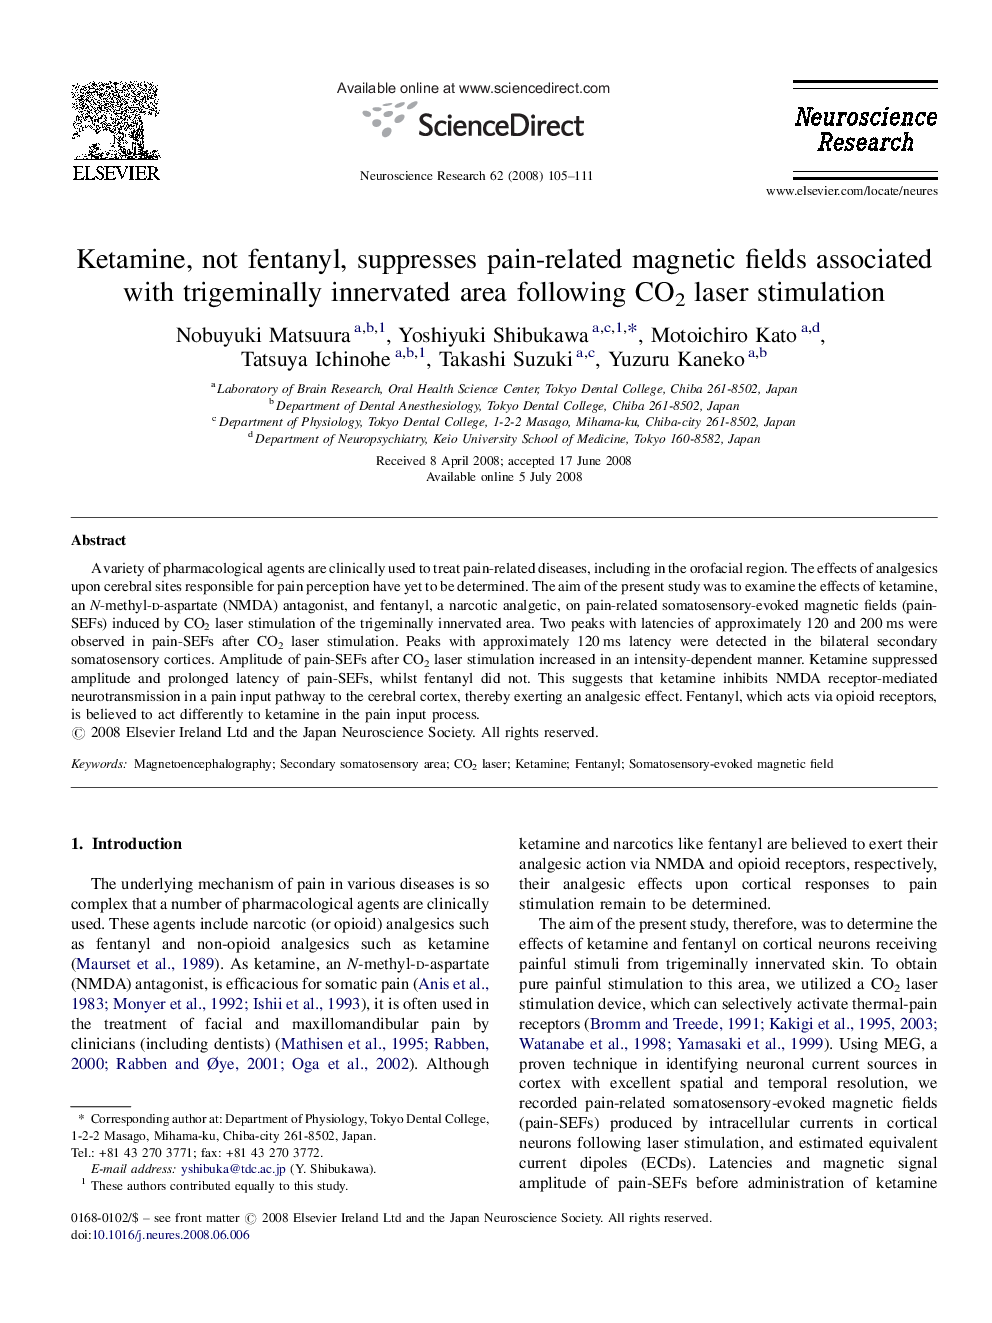 Ketamine, not fentanyl, suppresses pain-related magnetic fields associated with trigeminally innervated area following CO2 laser stimulation